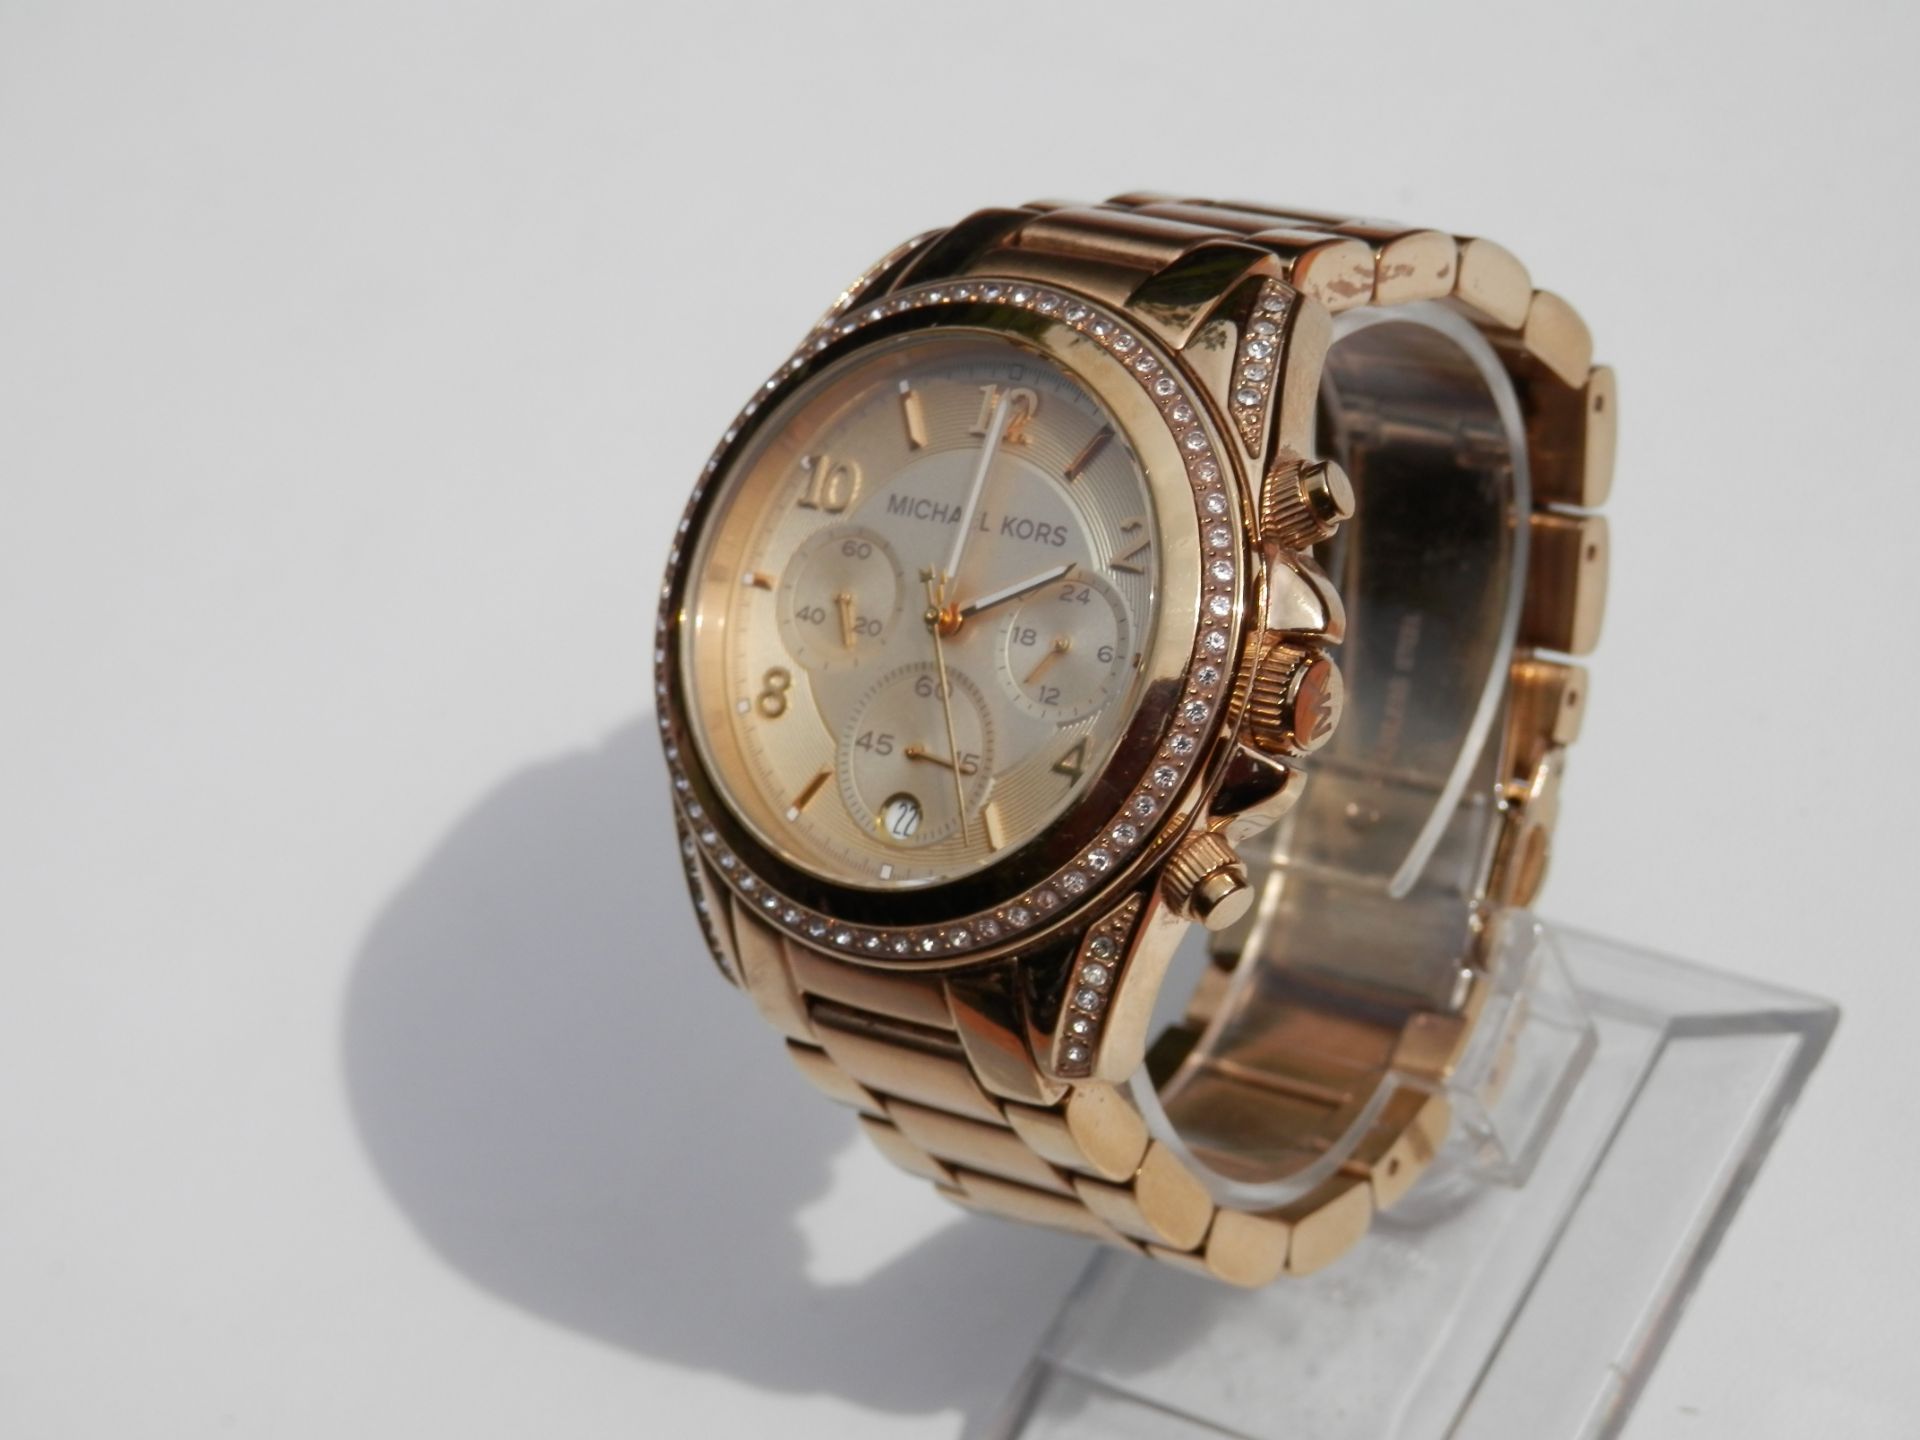 RRP £240. SUPERB LADIES MICHAEL KORS FULL STAINLESS GOLD PLATED DIAMANTE ENCRUSTED CHRONO DATE WATCH - Image 3 of 16